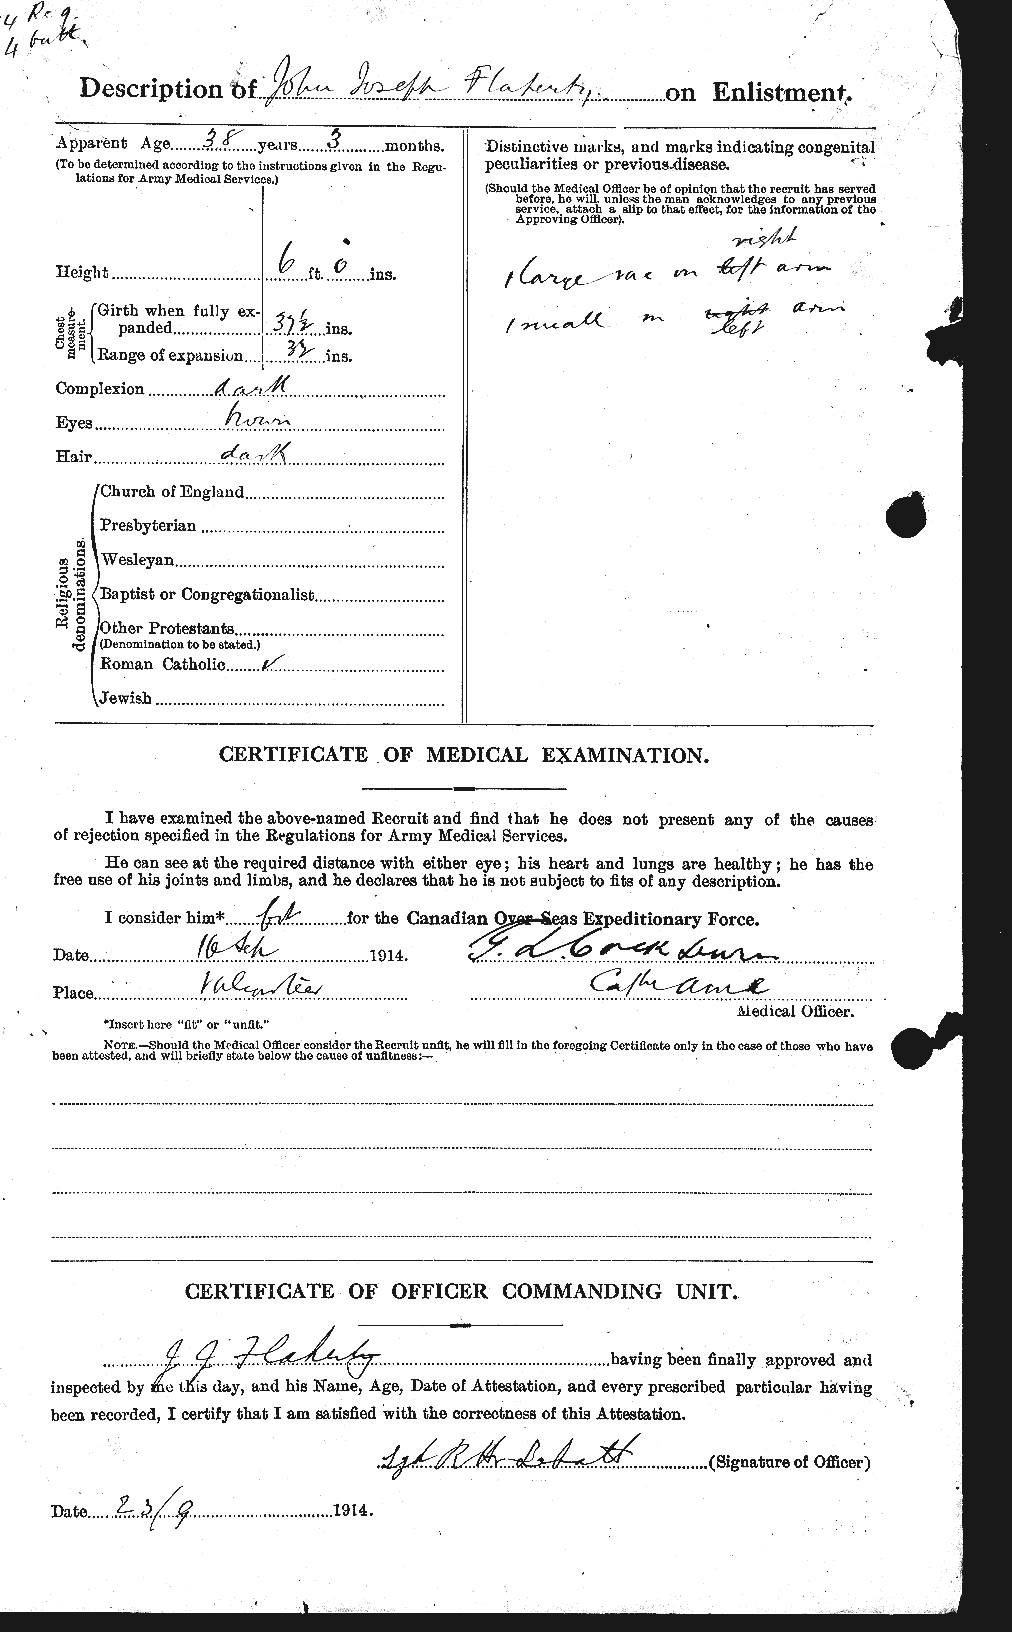 Personnel Records of the First World War - CEF 323363b